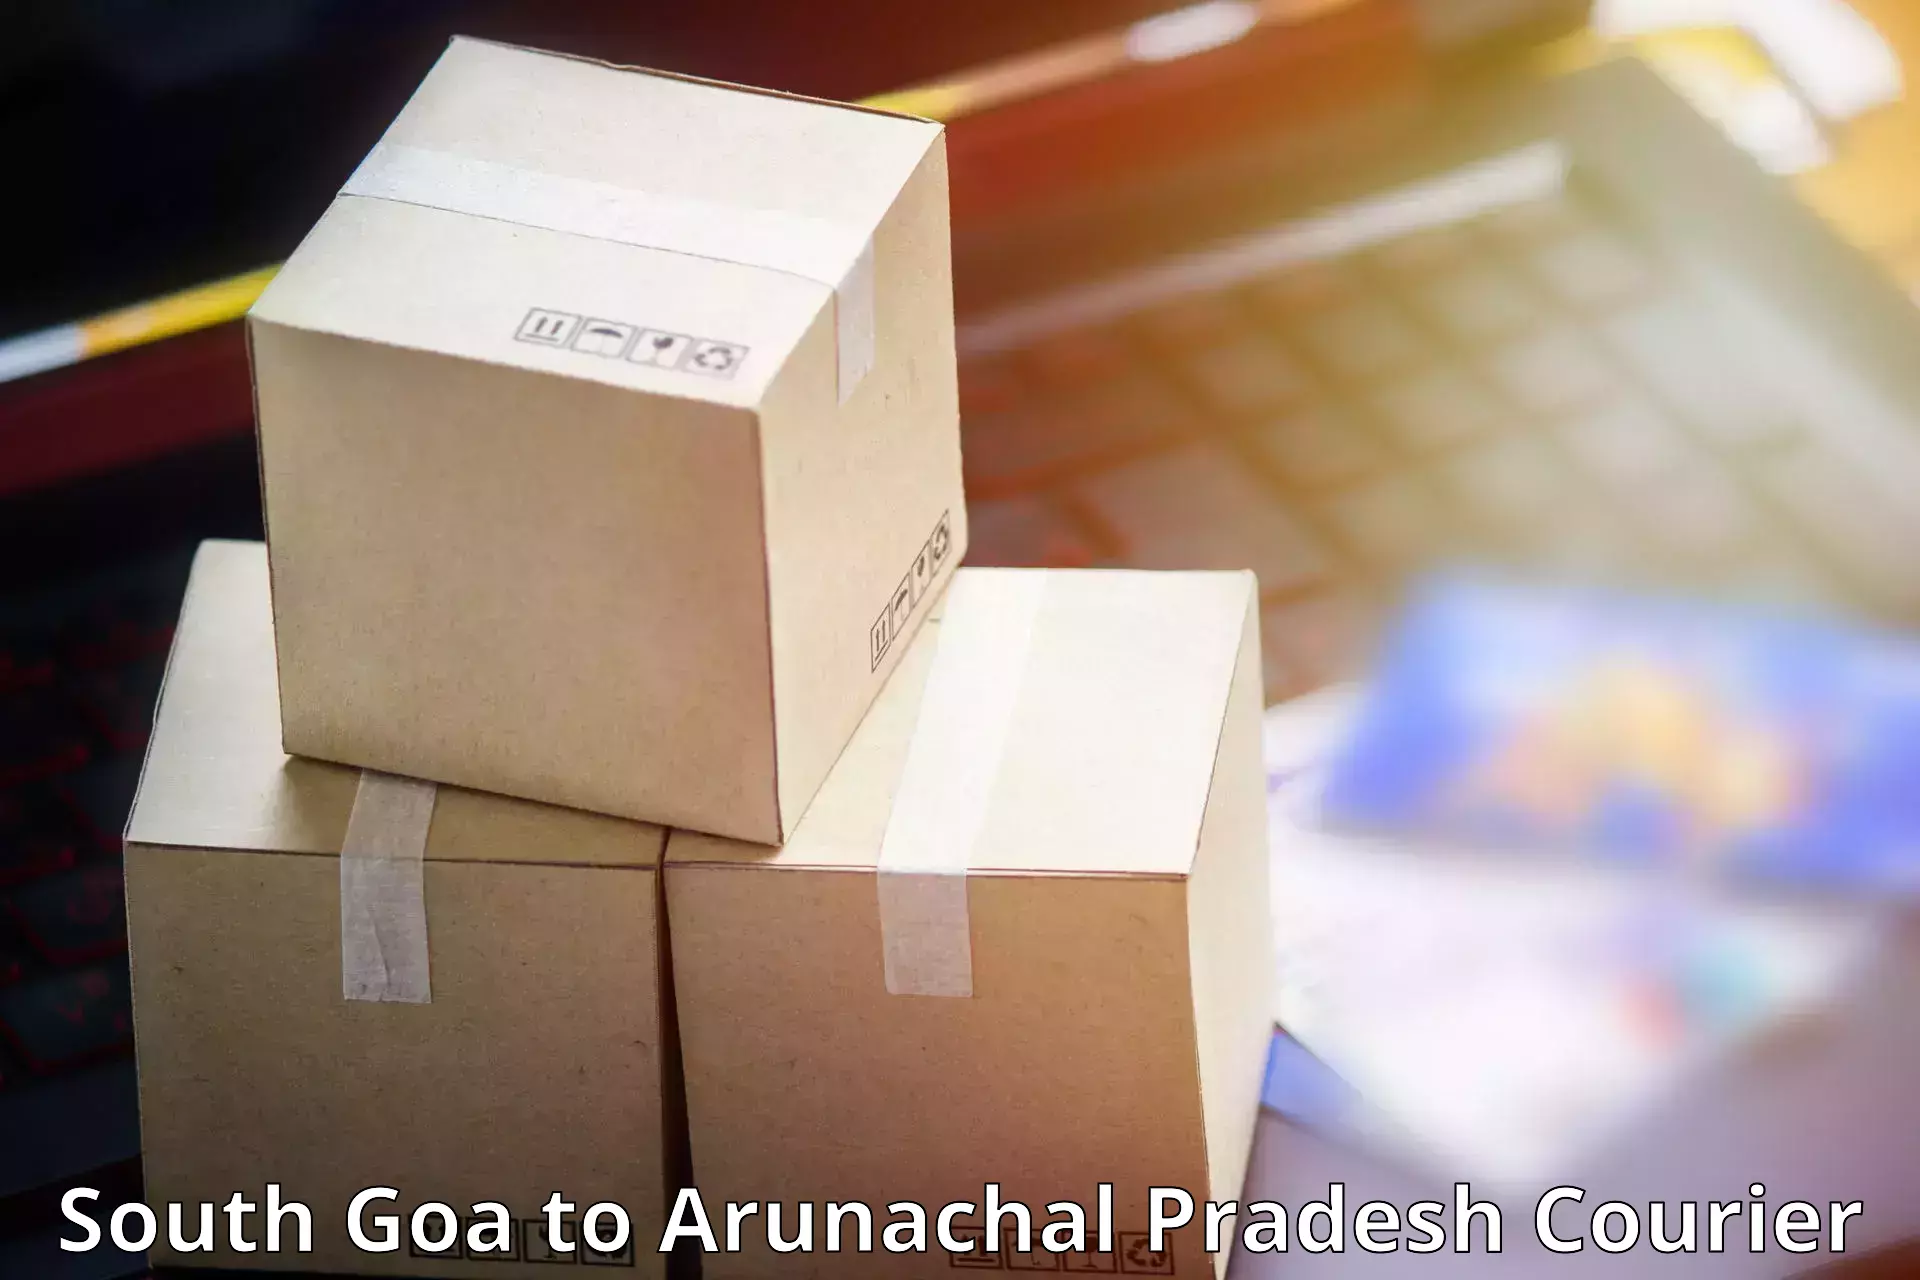 High-speed parcel service South Goa to Tirap